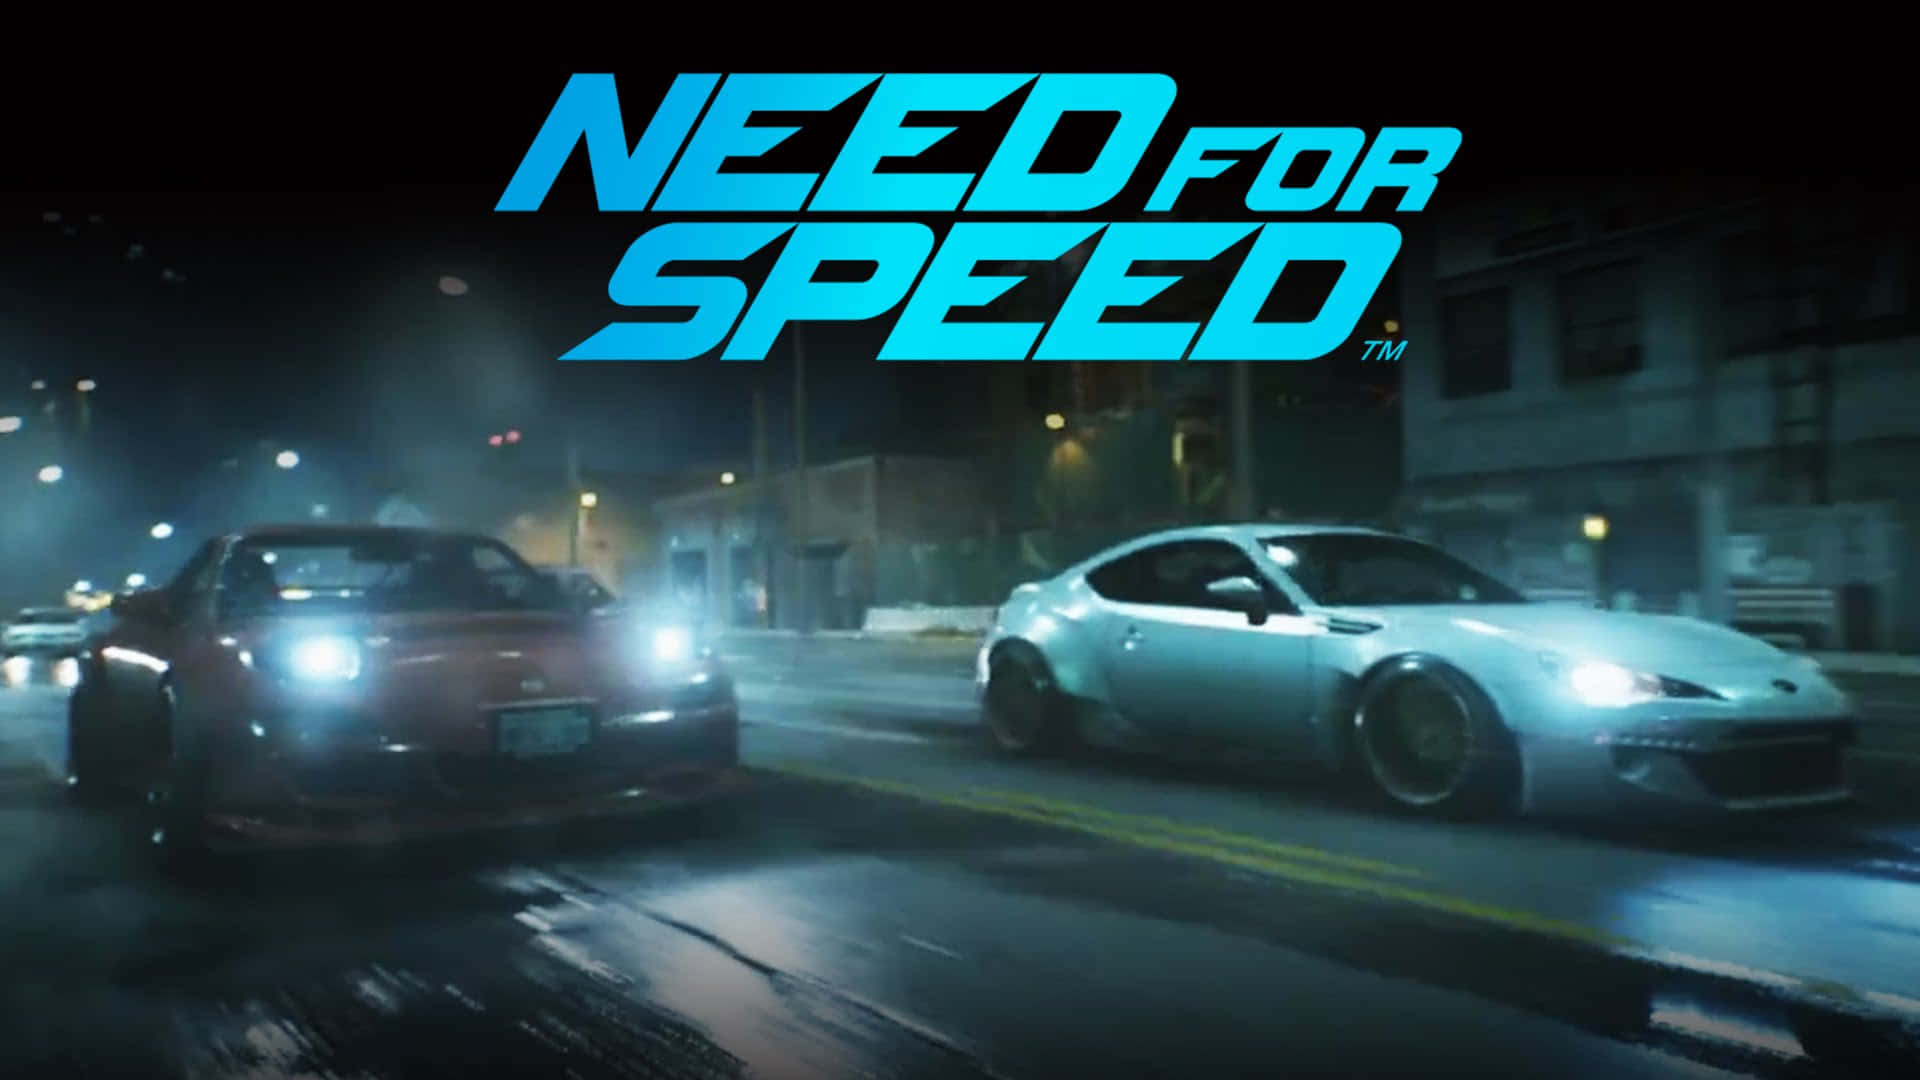 Onlinespiel Need For Speed Pc 2015 Poster Wallpaper